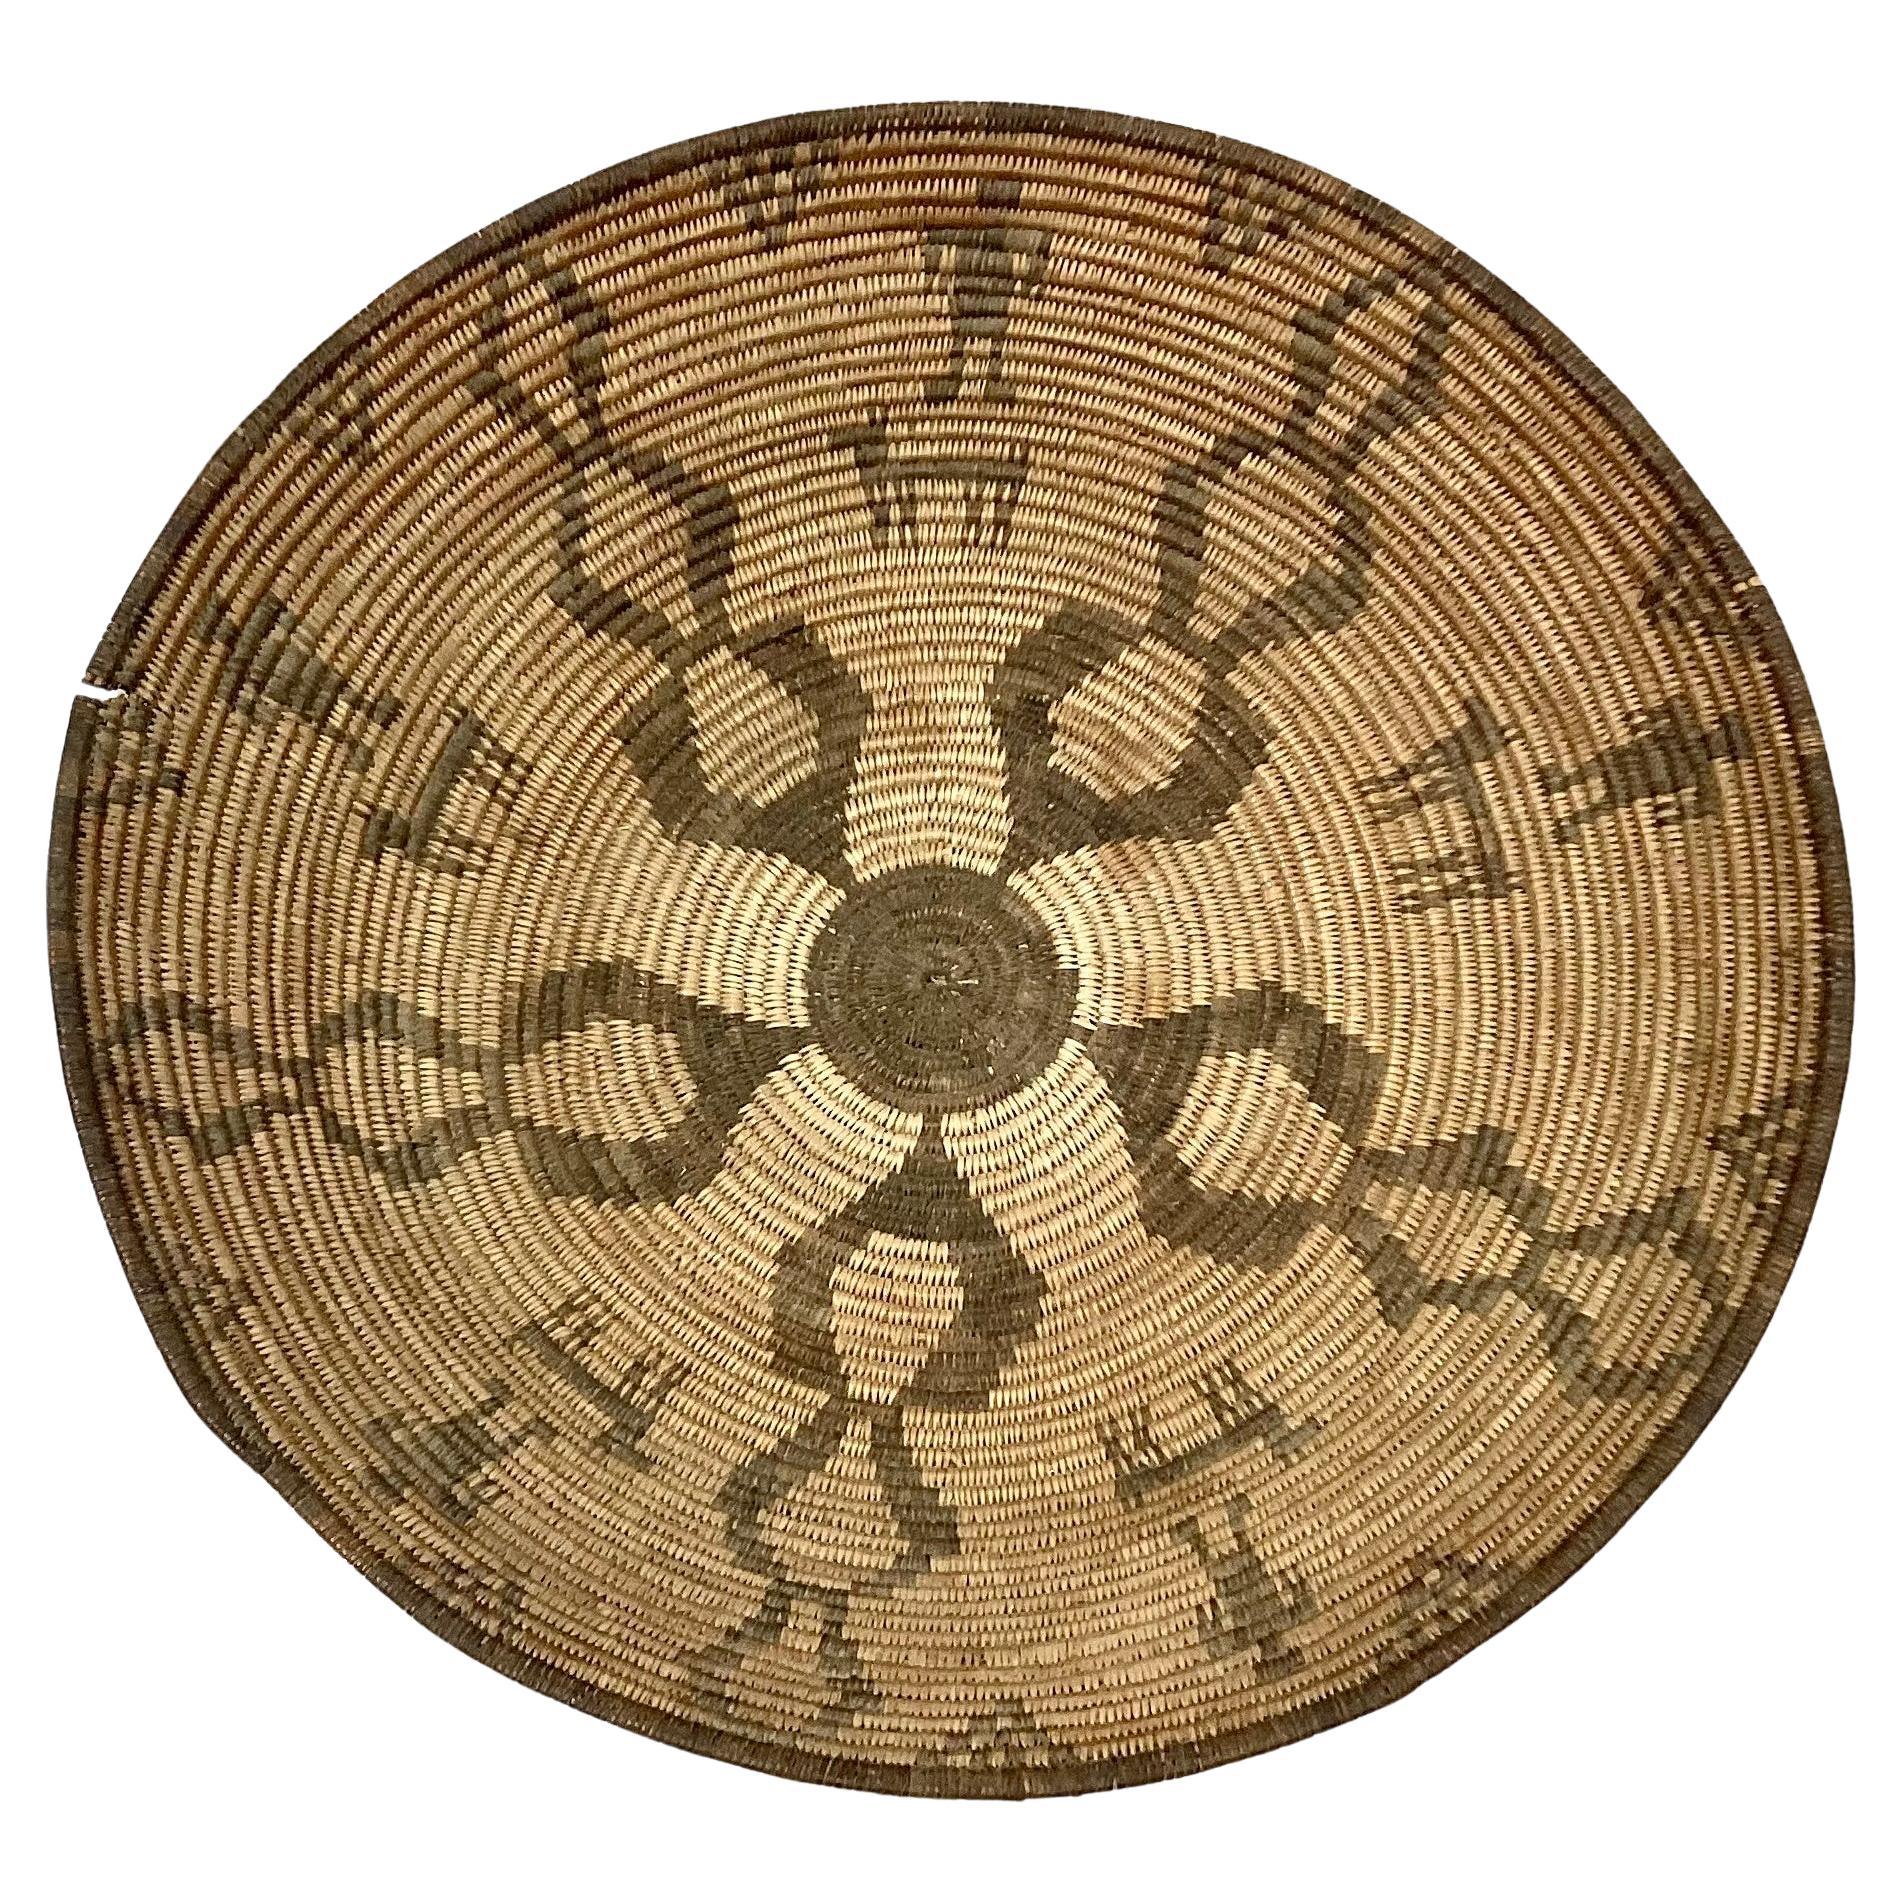 Large Native American Indian Apache coil basket. Basket makers used a coil technique and wrap with strands of willow or devil's claw (black). The basket is shallow, diameter is 18.5